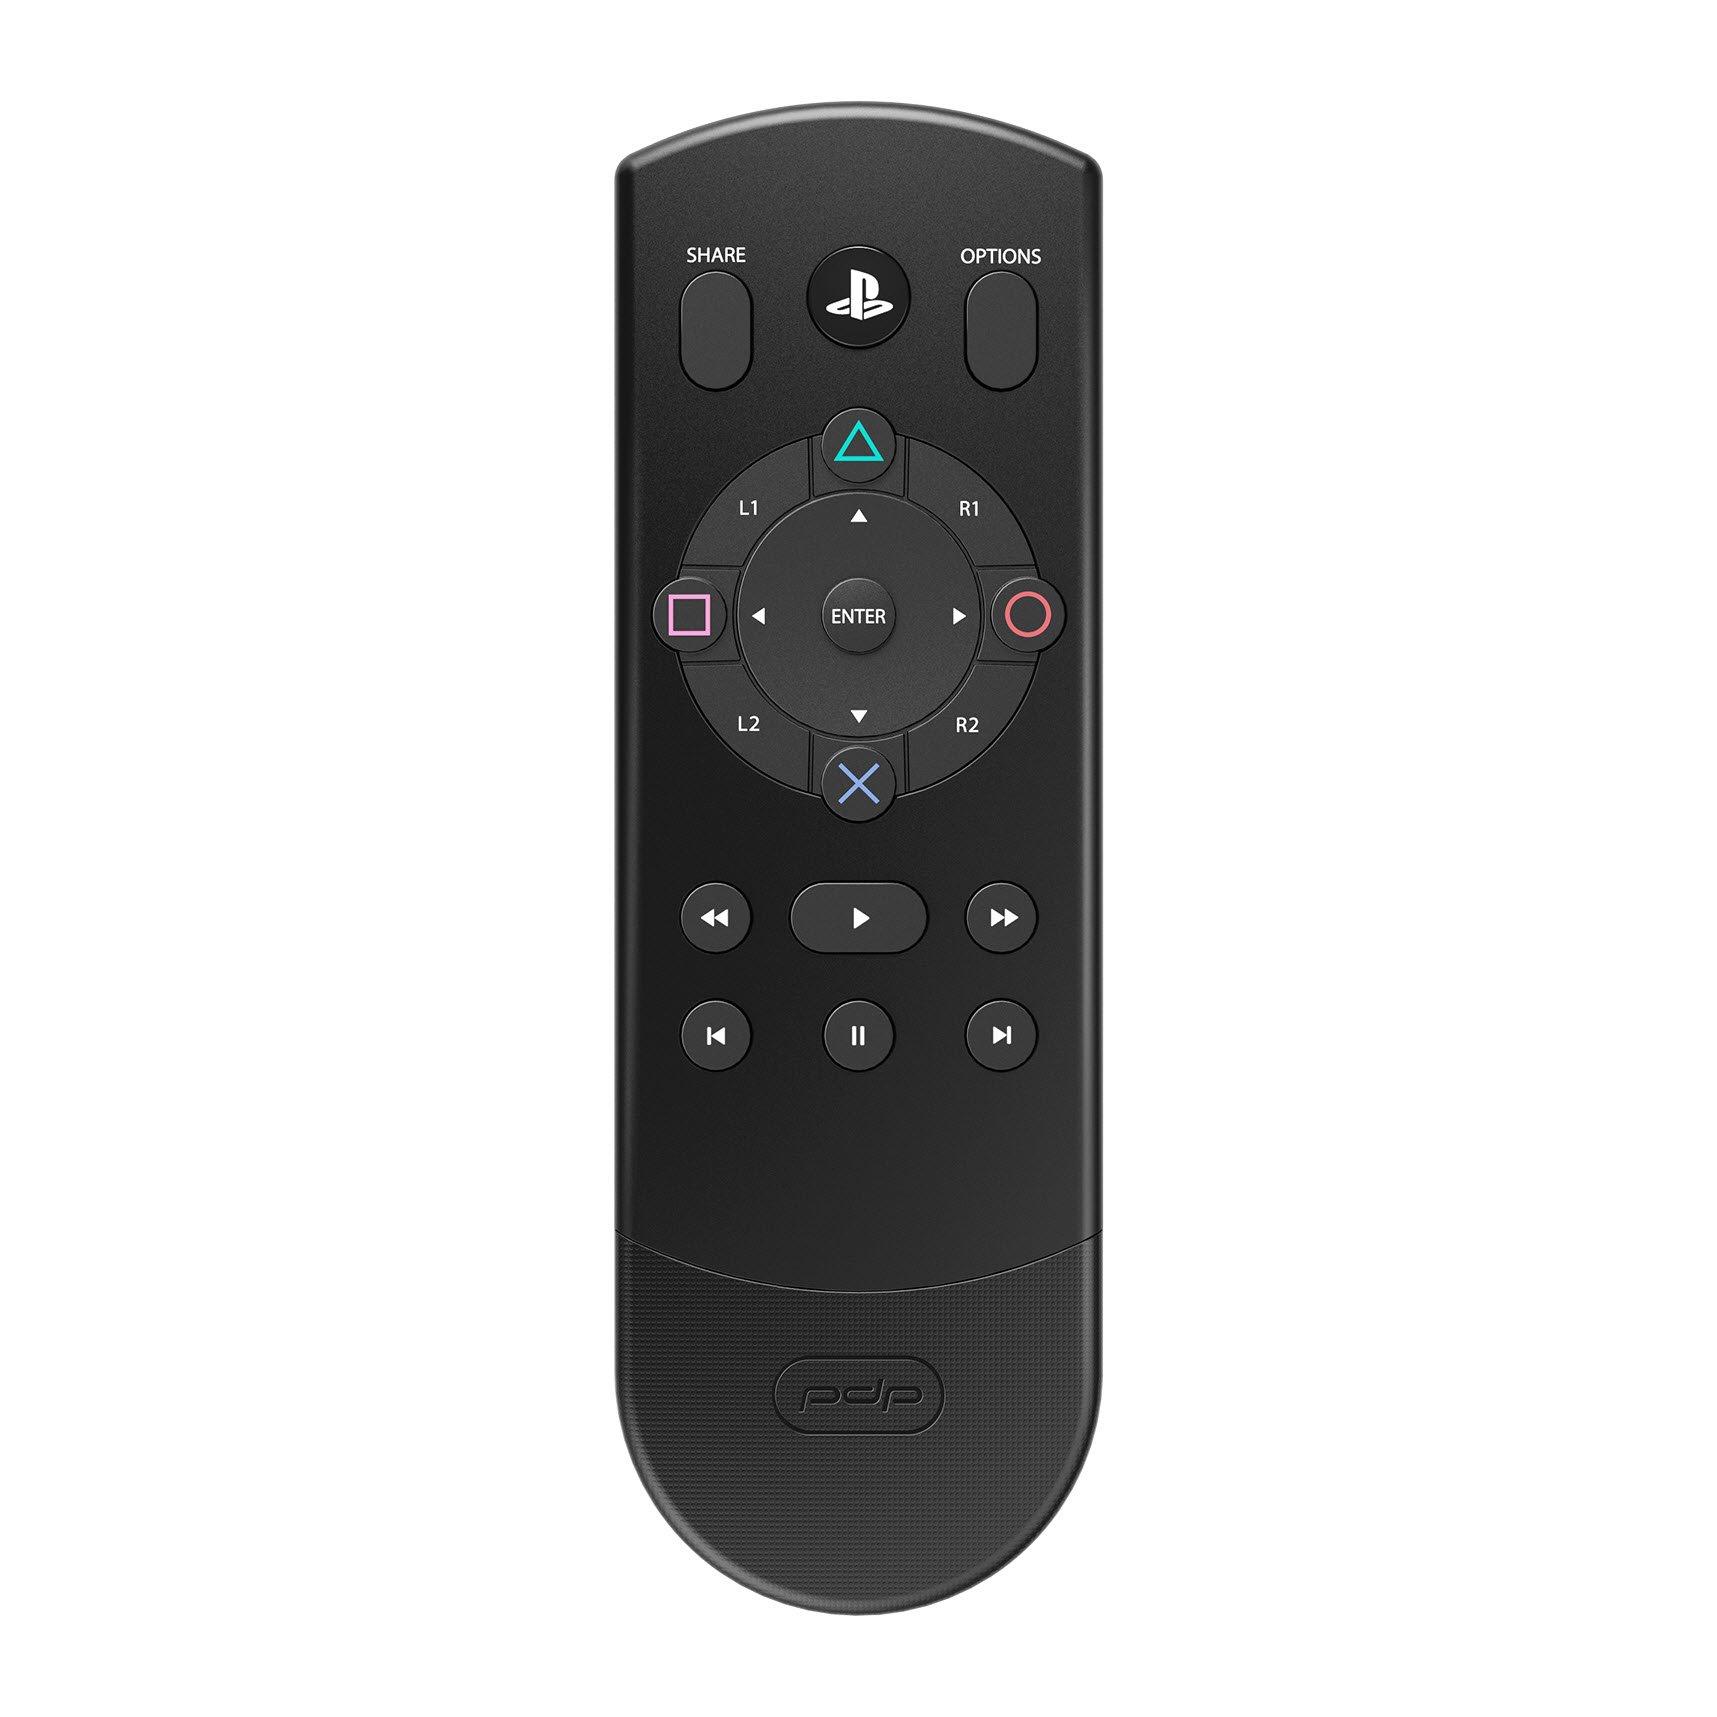 ps3 media remote on ps4